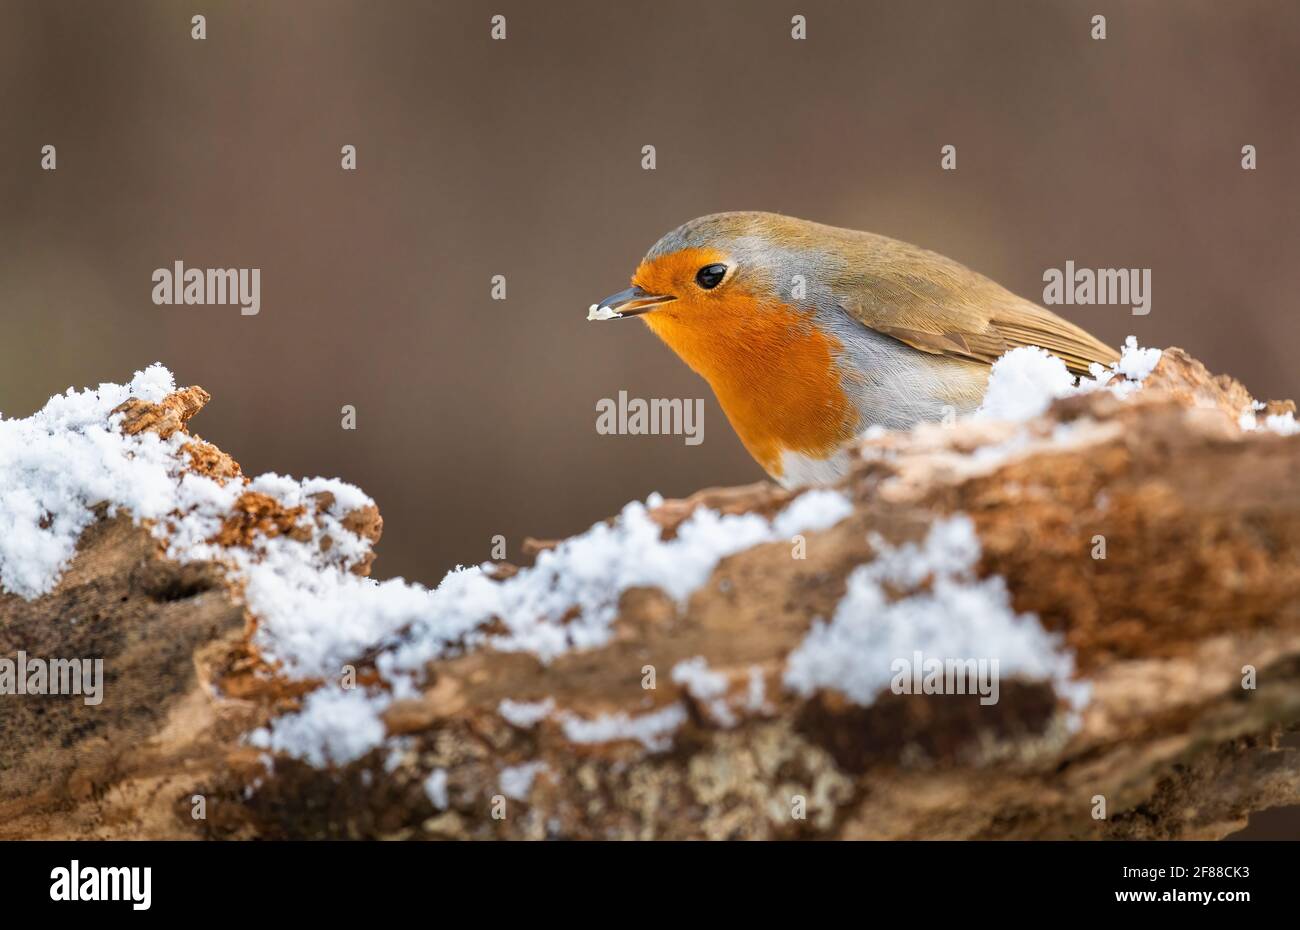 Portrait of a common garden Robin sitting on the edge of a snow covered tree stump with a blurred background. Stock Photo